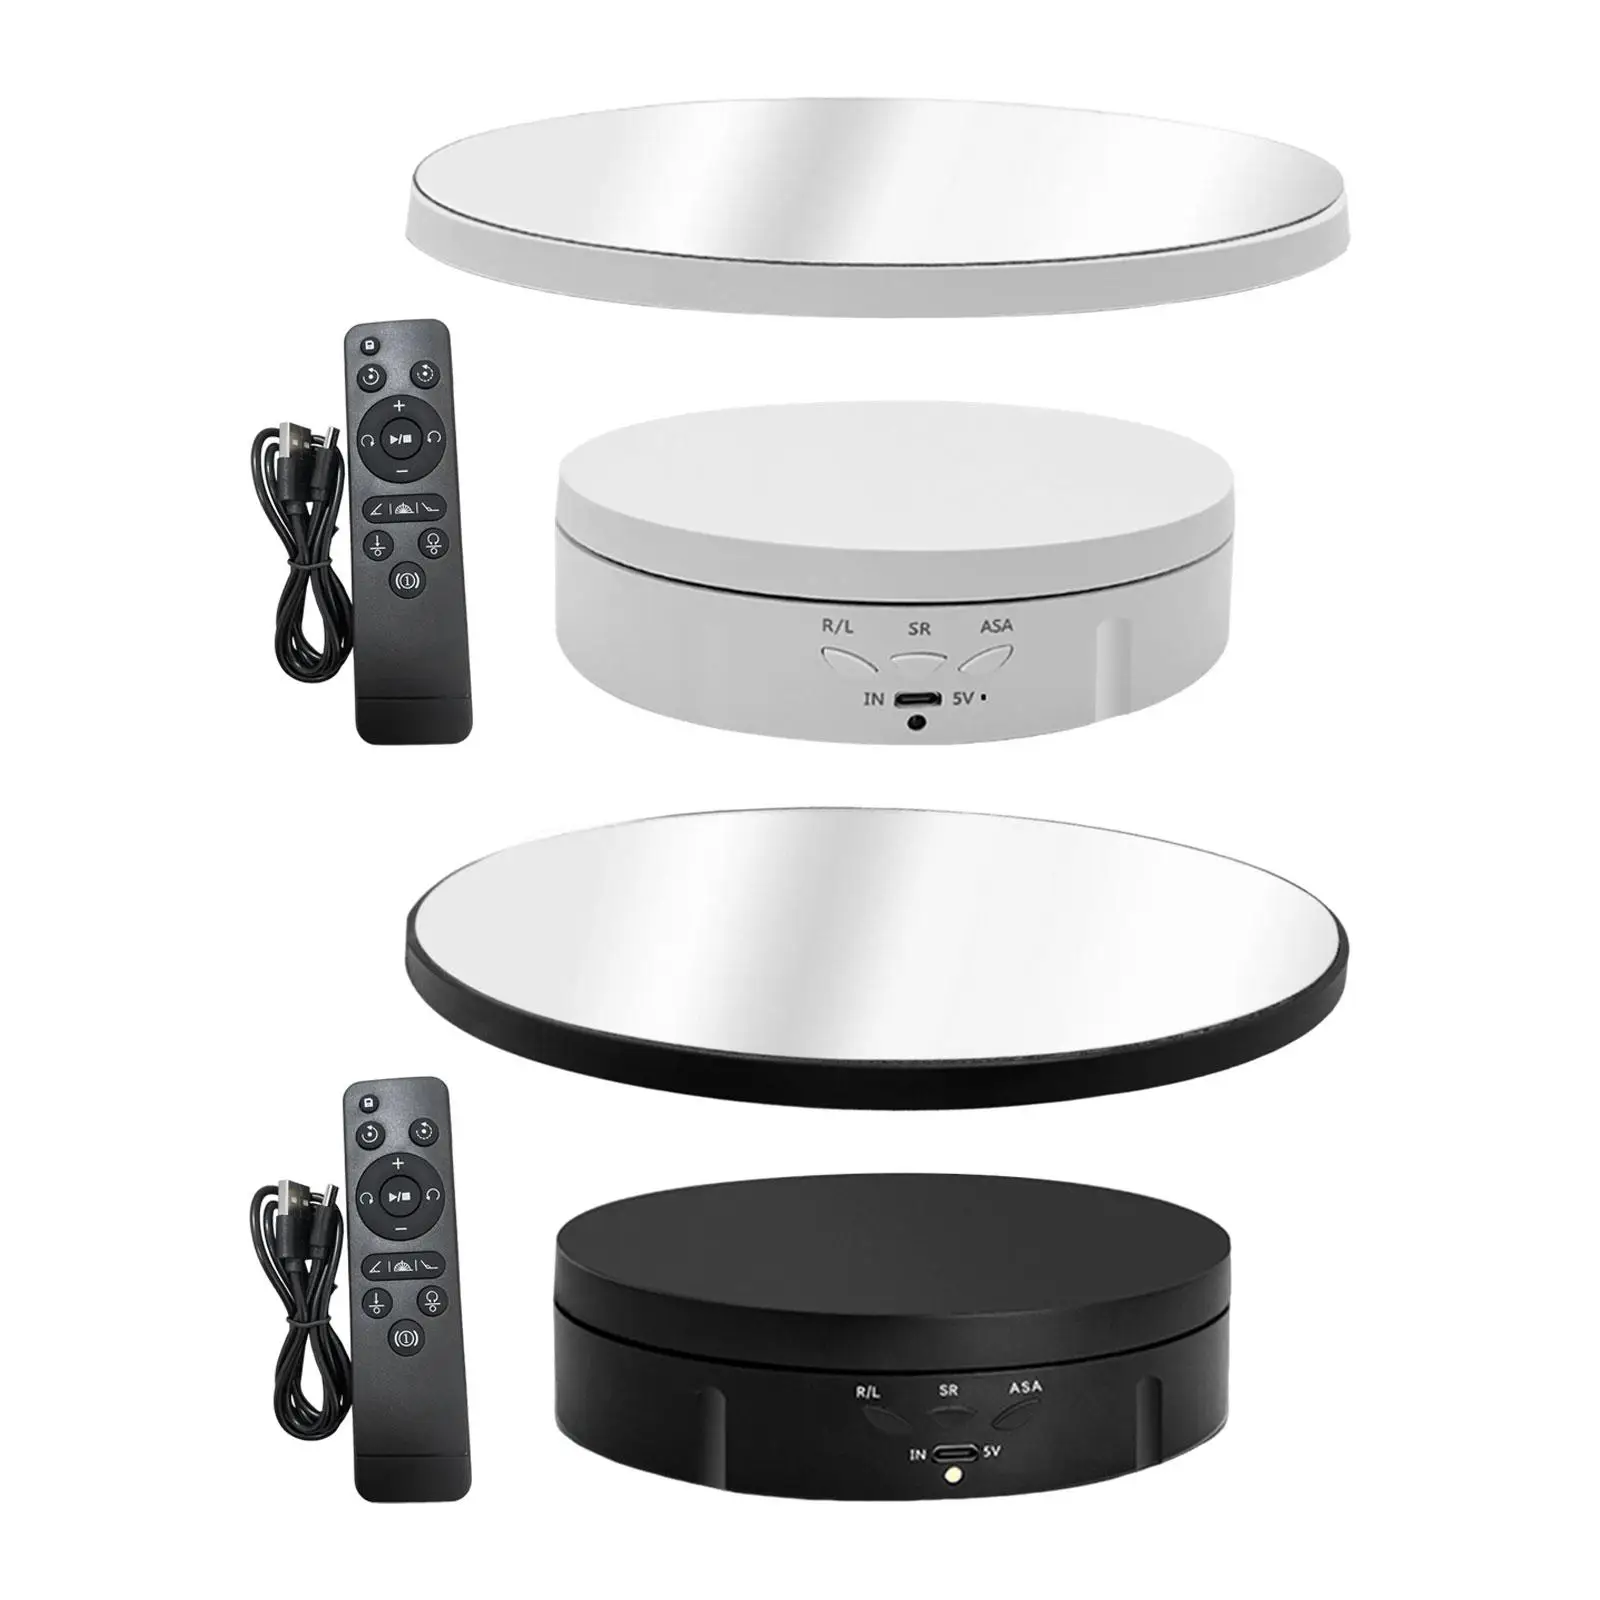 

Rotating Display Stand Mirror Covered Automatic Revolving Platform Photography Turntable for Video Product Display Model Cake